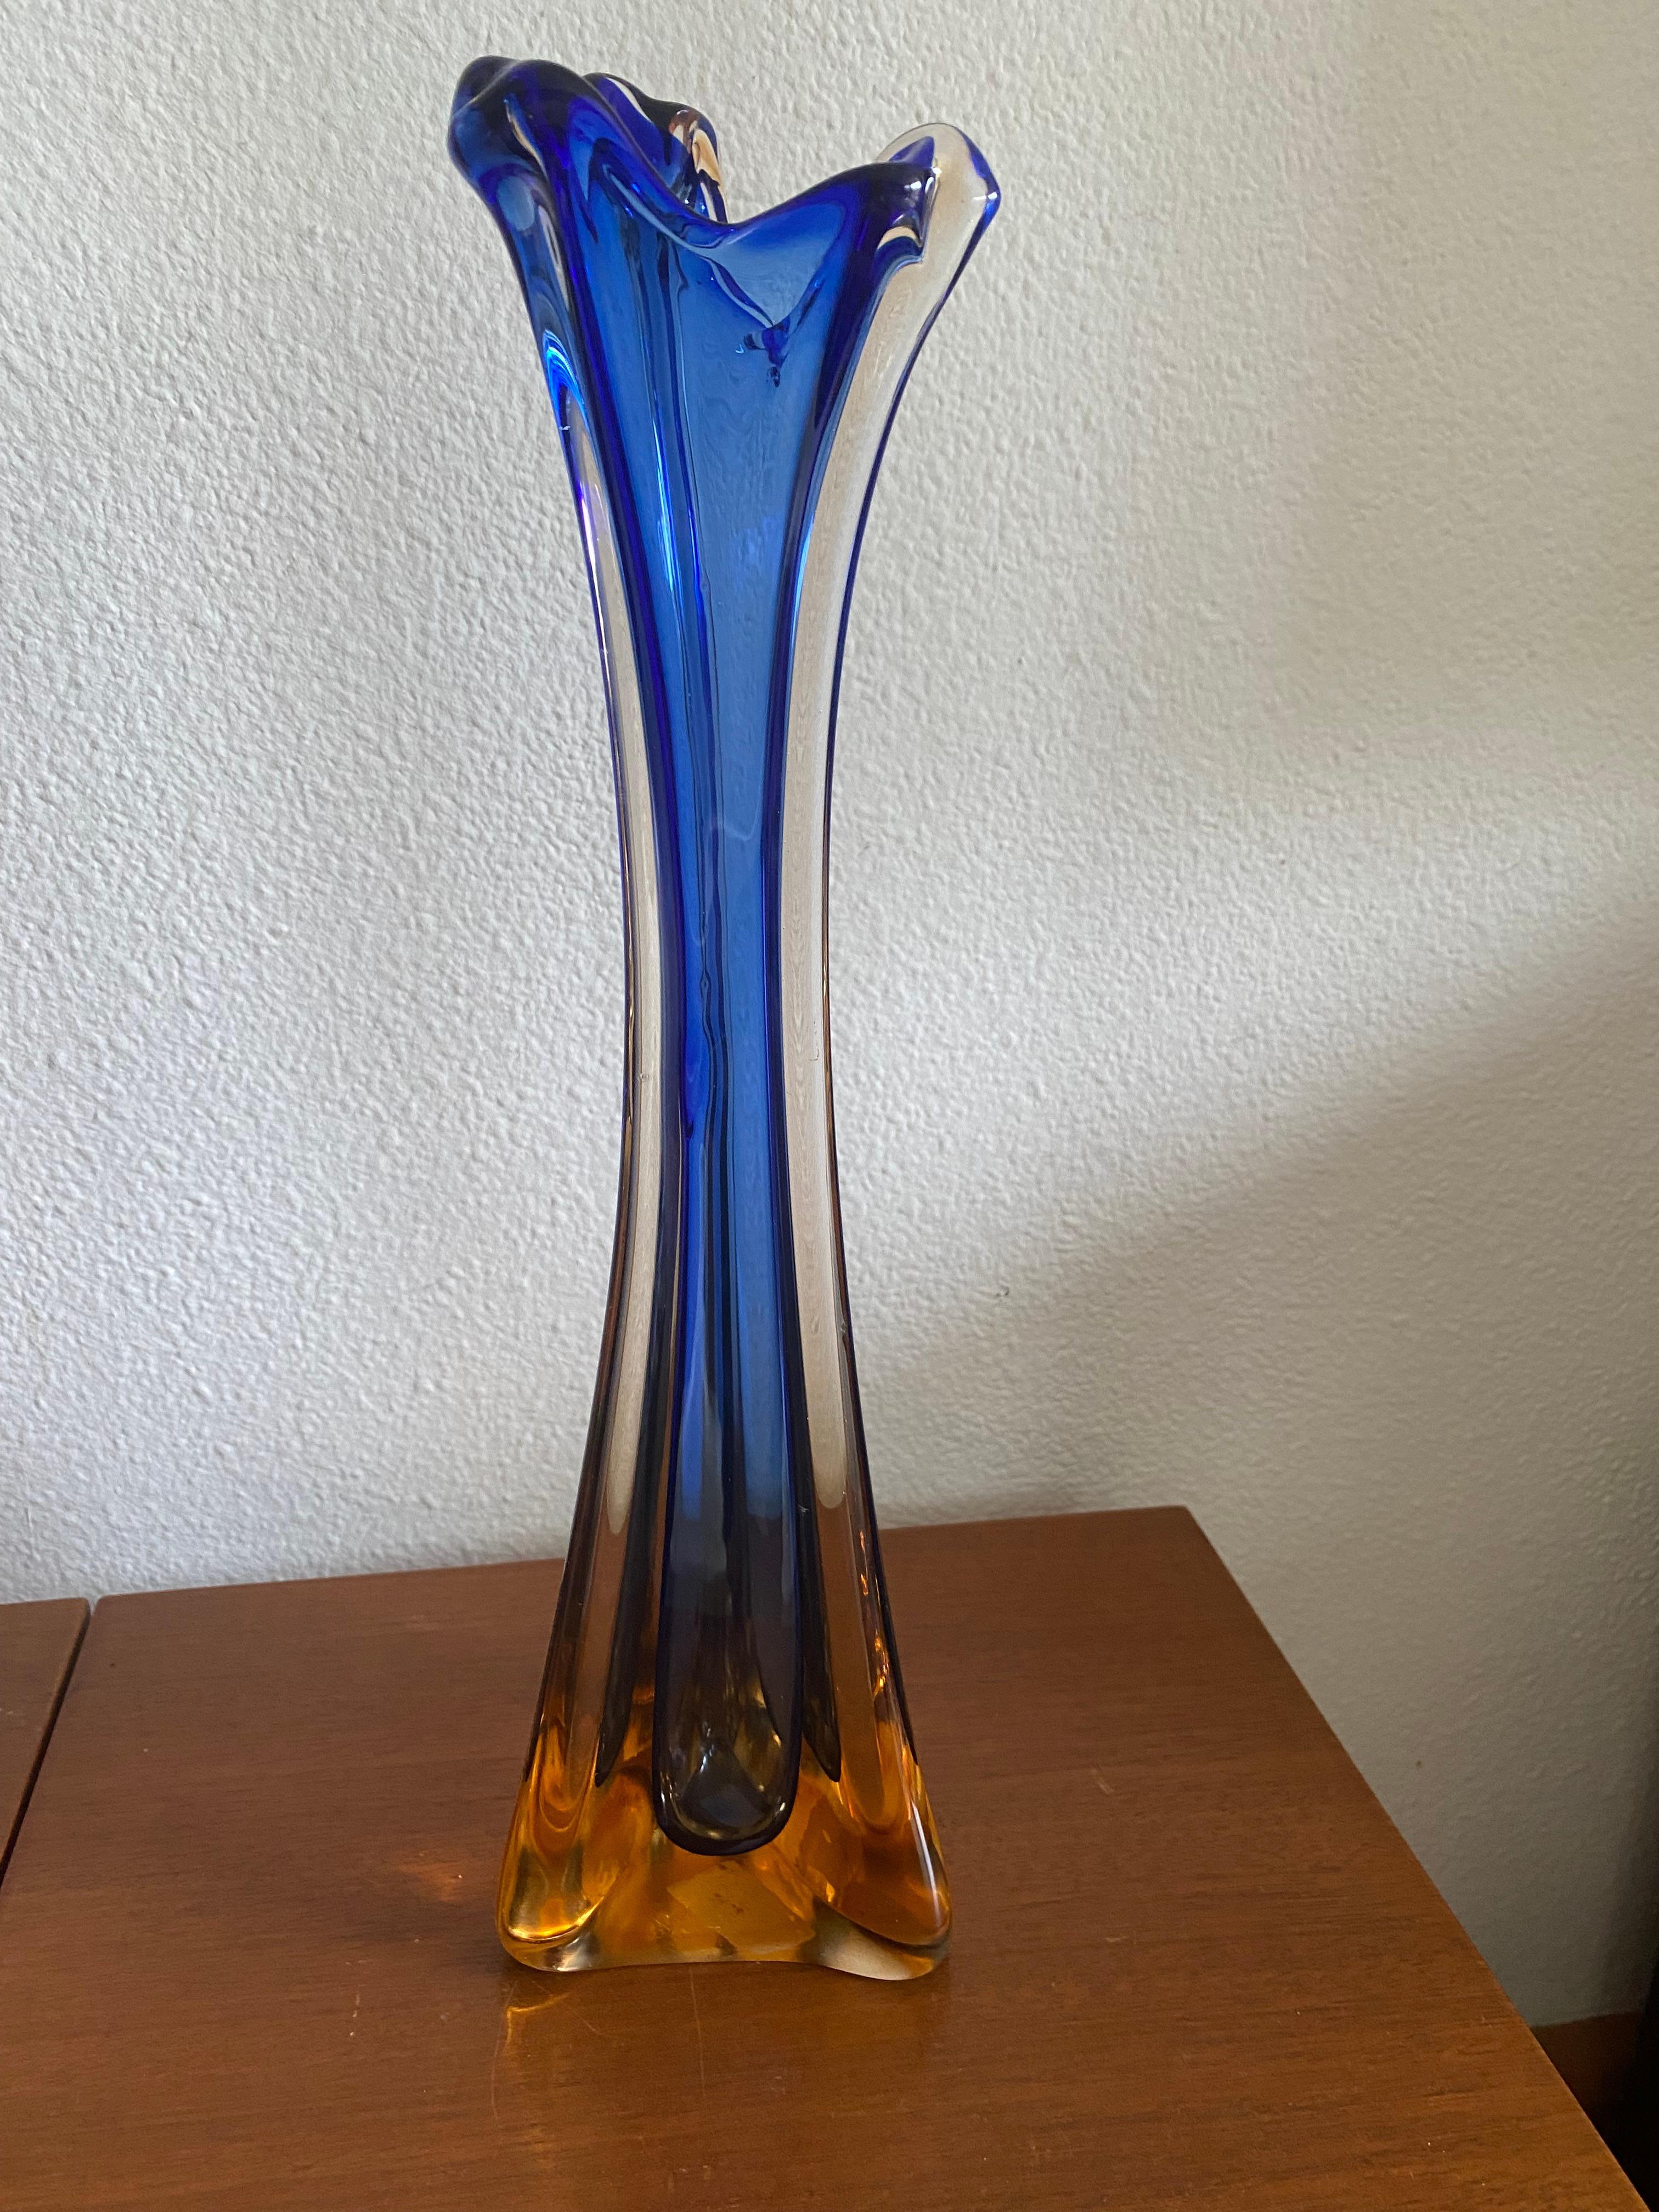 Beautiful blue and peach Mid-Century Modern Italian Murano glass vase. Made using the Sommerso (submerged) glass technique.